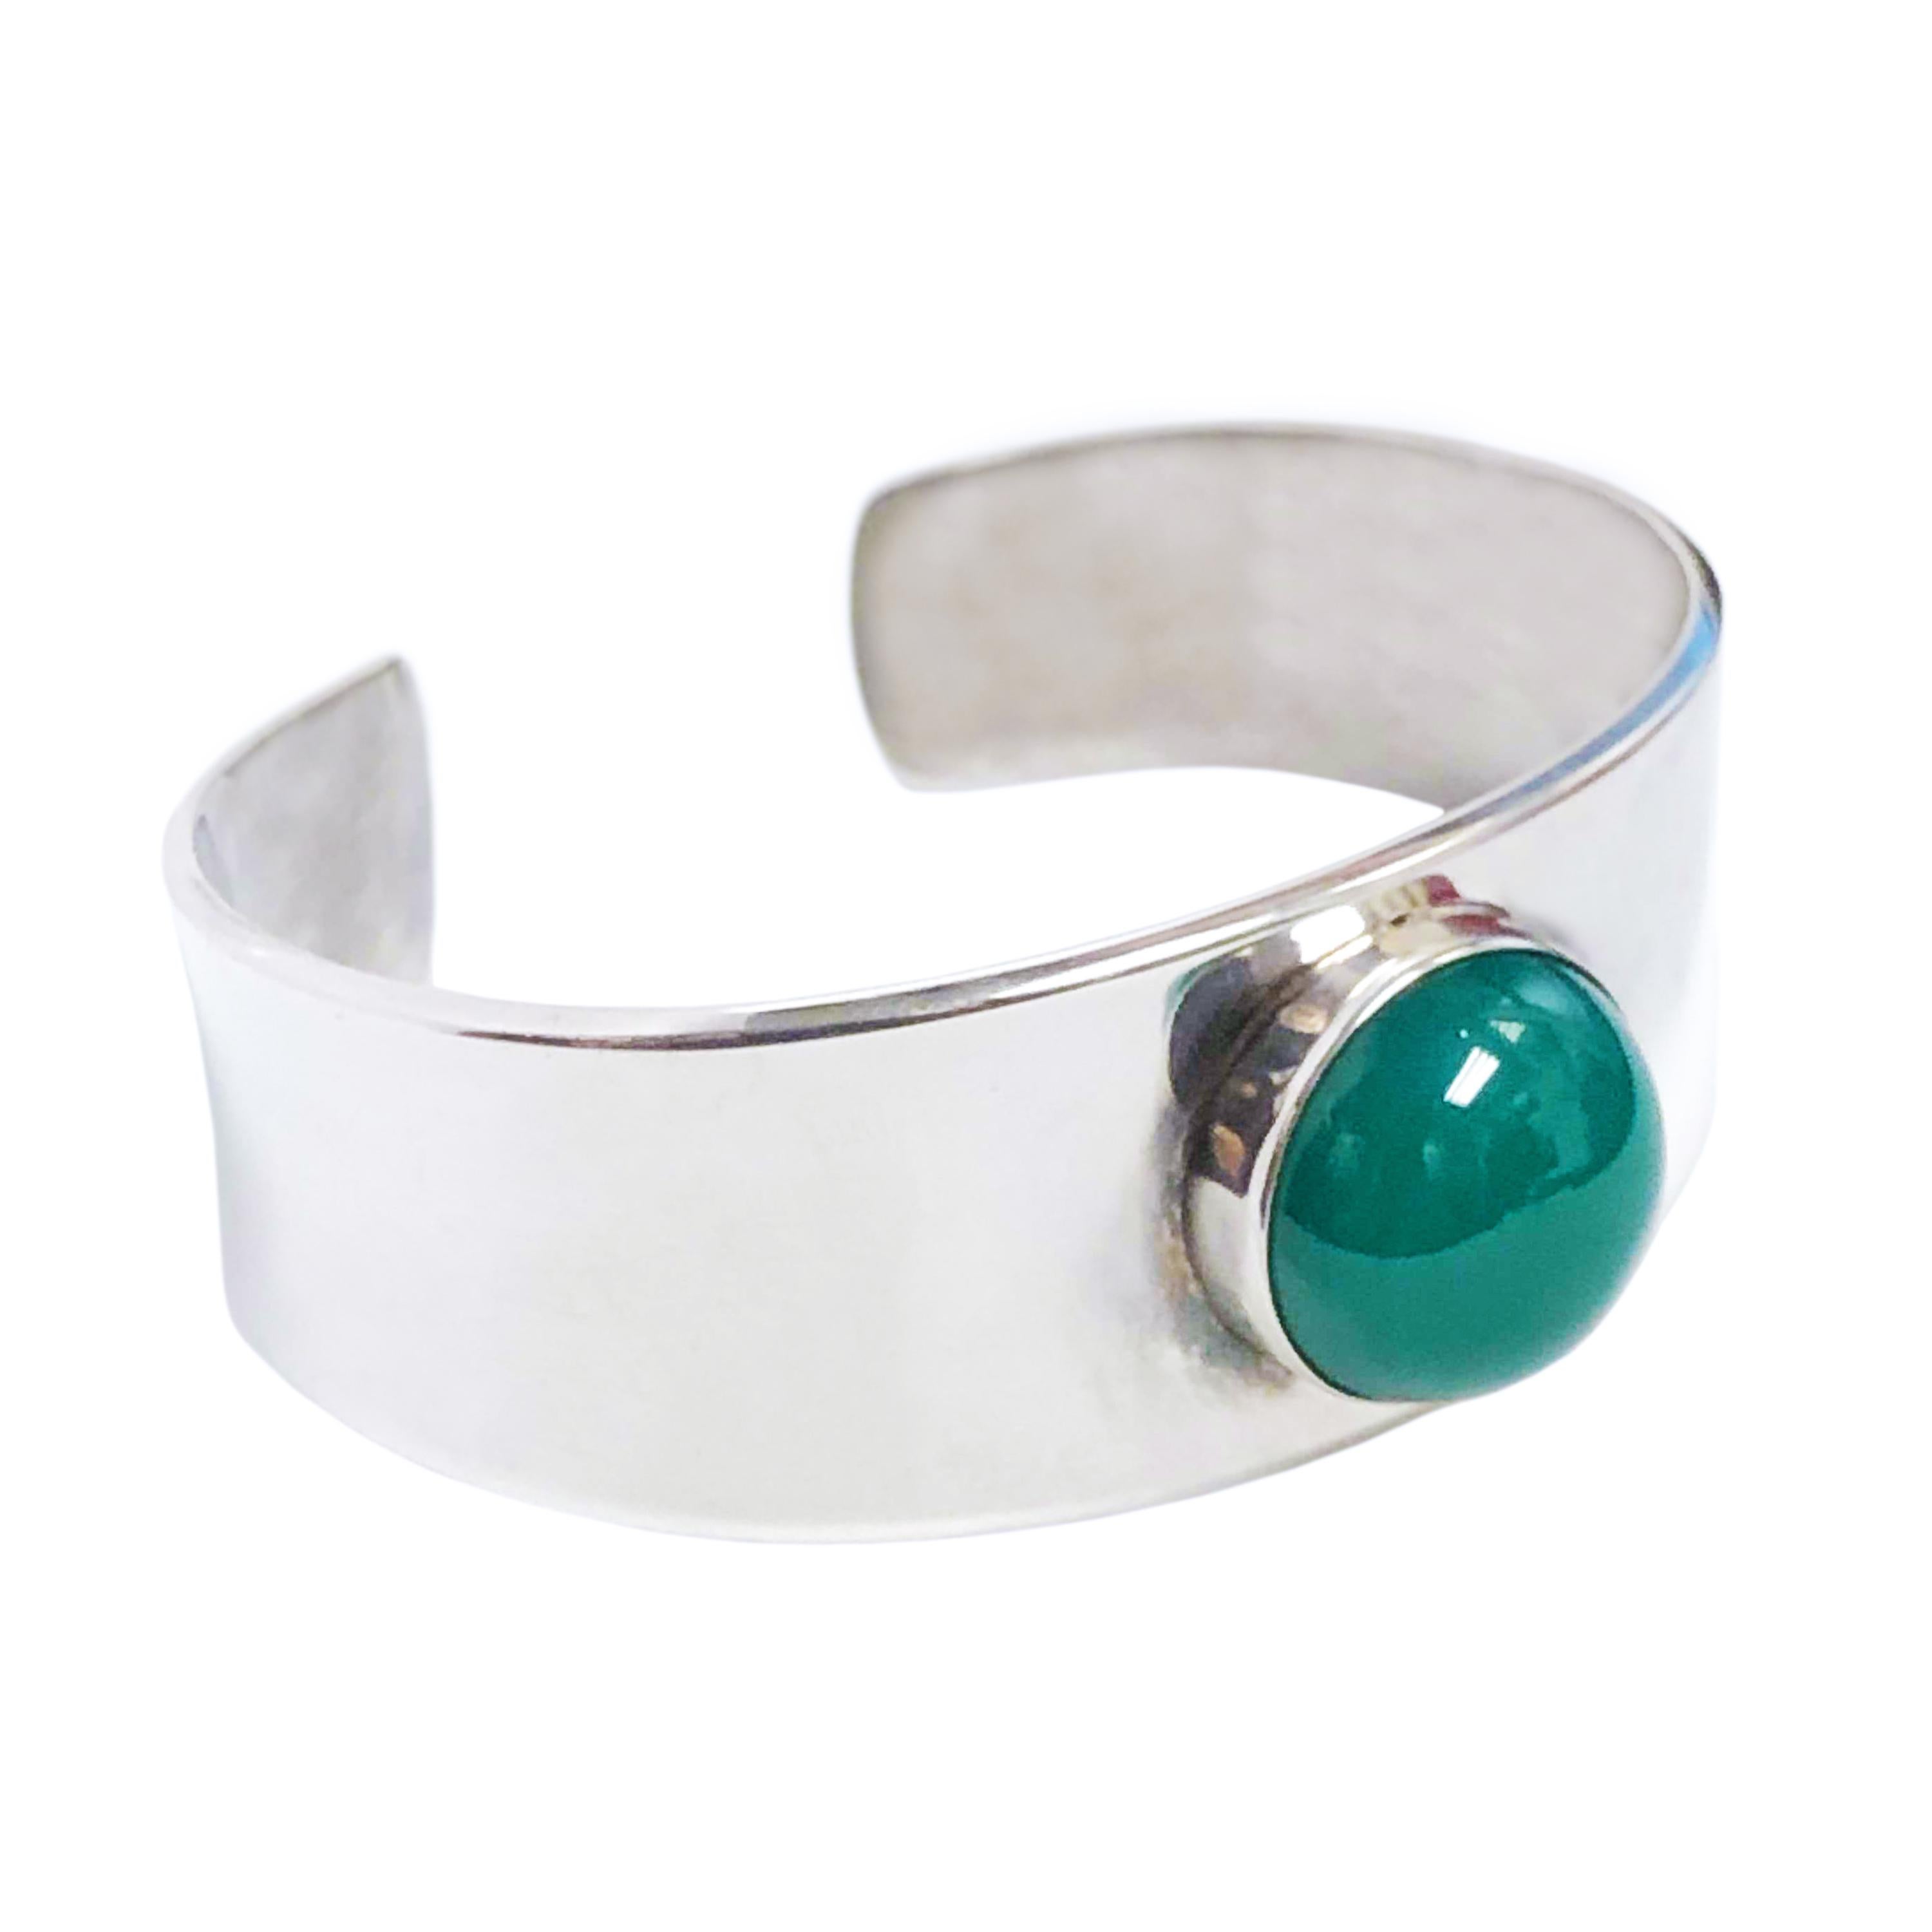 Circa 1960s Georg Jensen Denmark Sterling Cuff Bracelet design by Poul Hansen, measuring 7/8 inch wide at the top and tapering down to 5/8 inch. Centrally set with a Green Chryophrase measuring 16 MM in diameter. Inside measurement is 6 1/2 inches